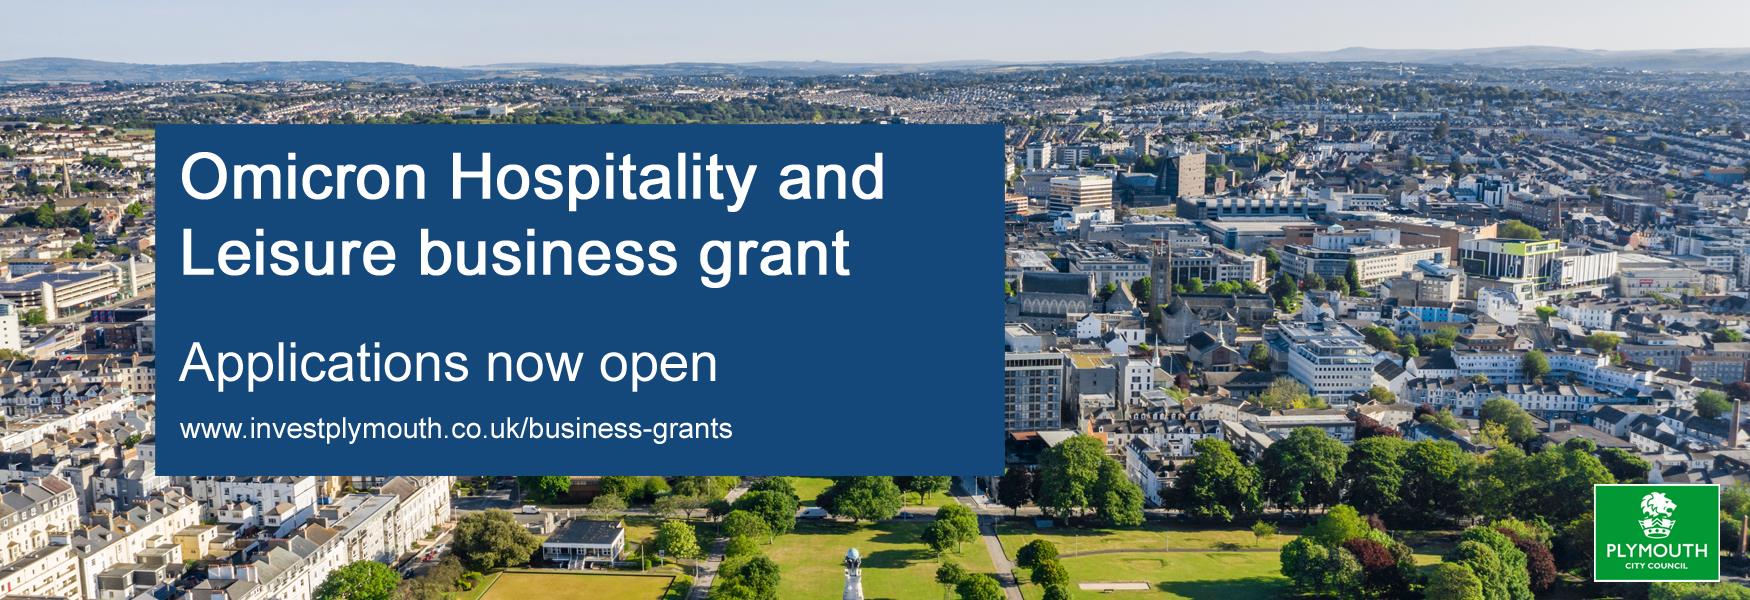 Omicron Hospitality and Leisure business grant